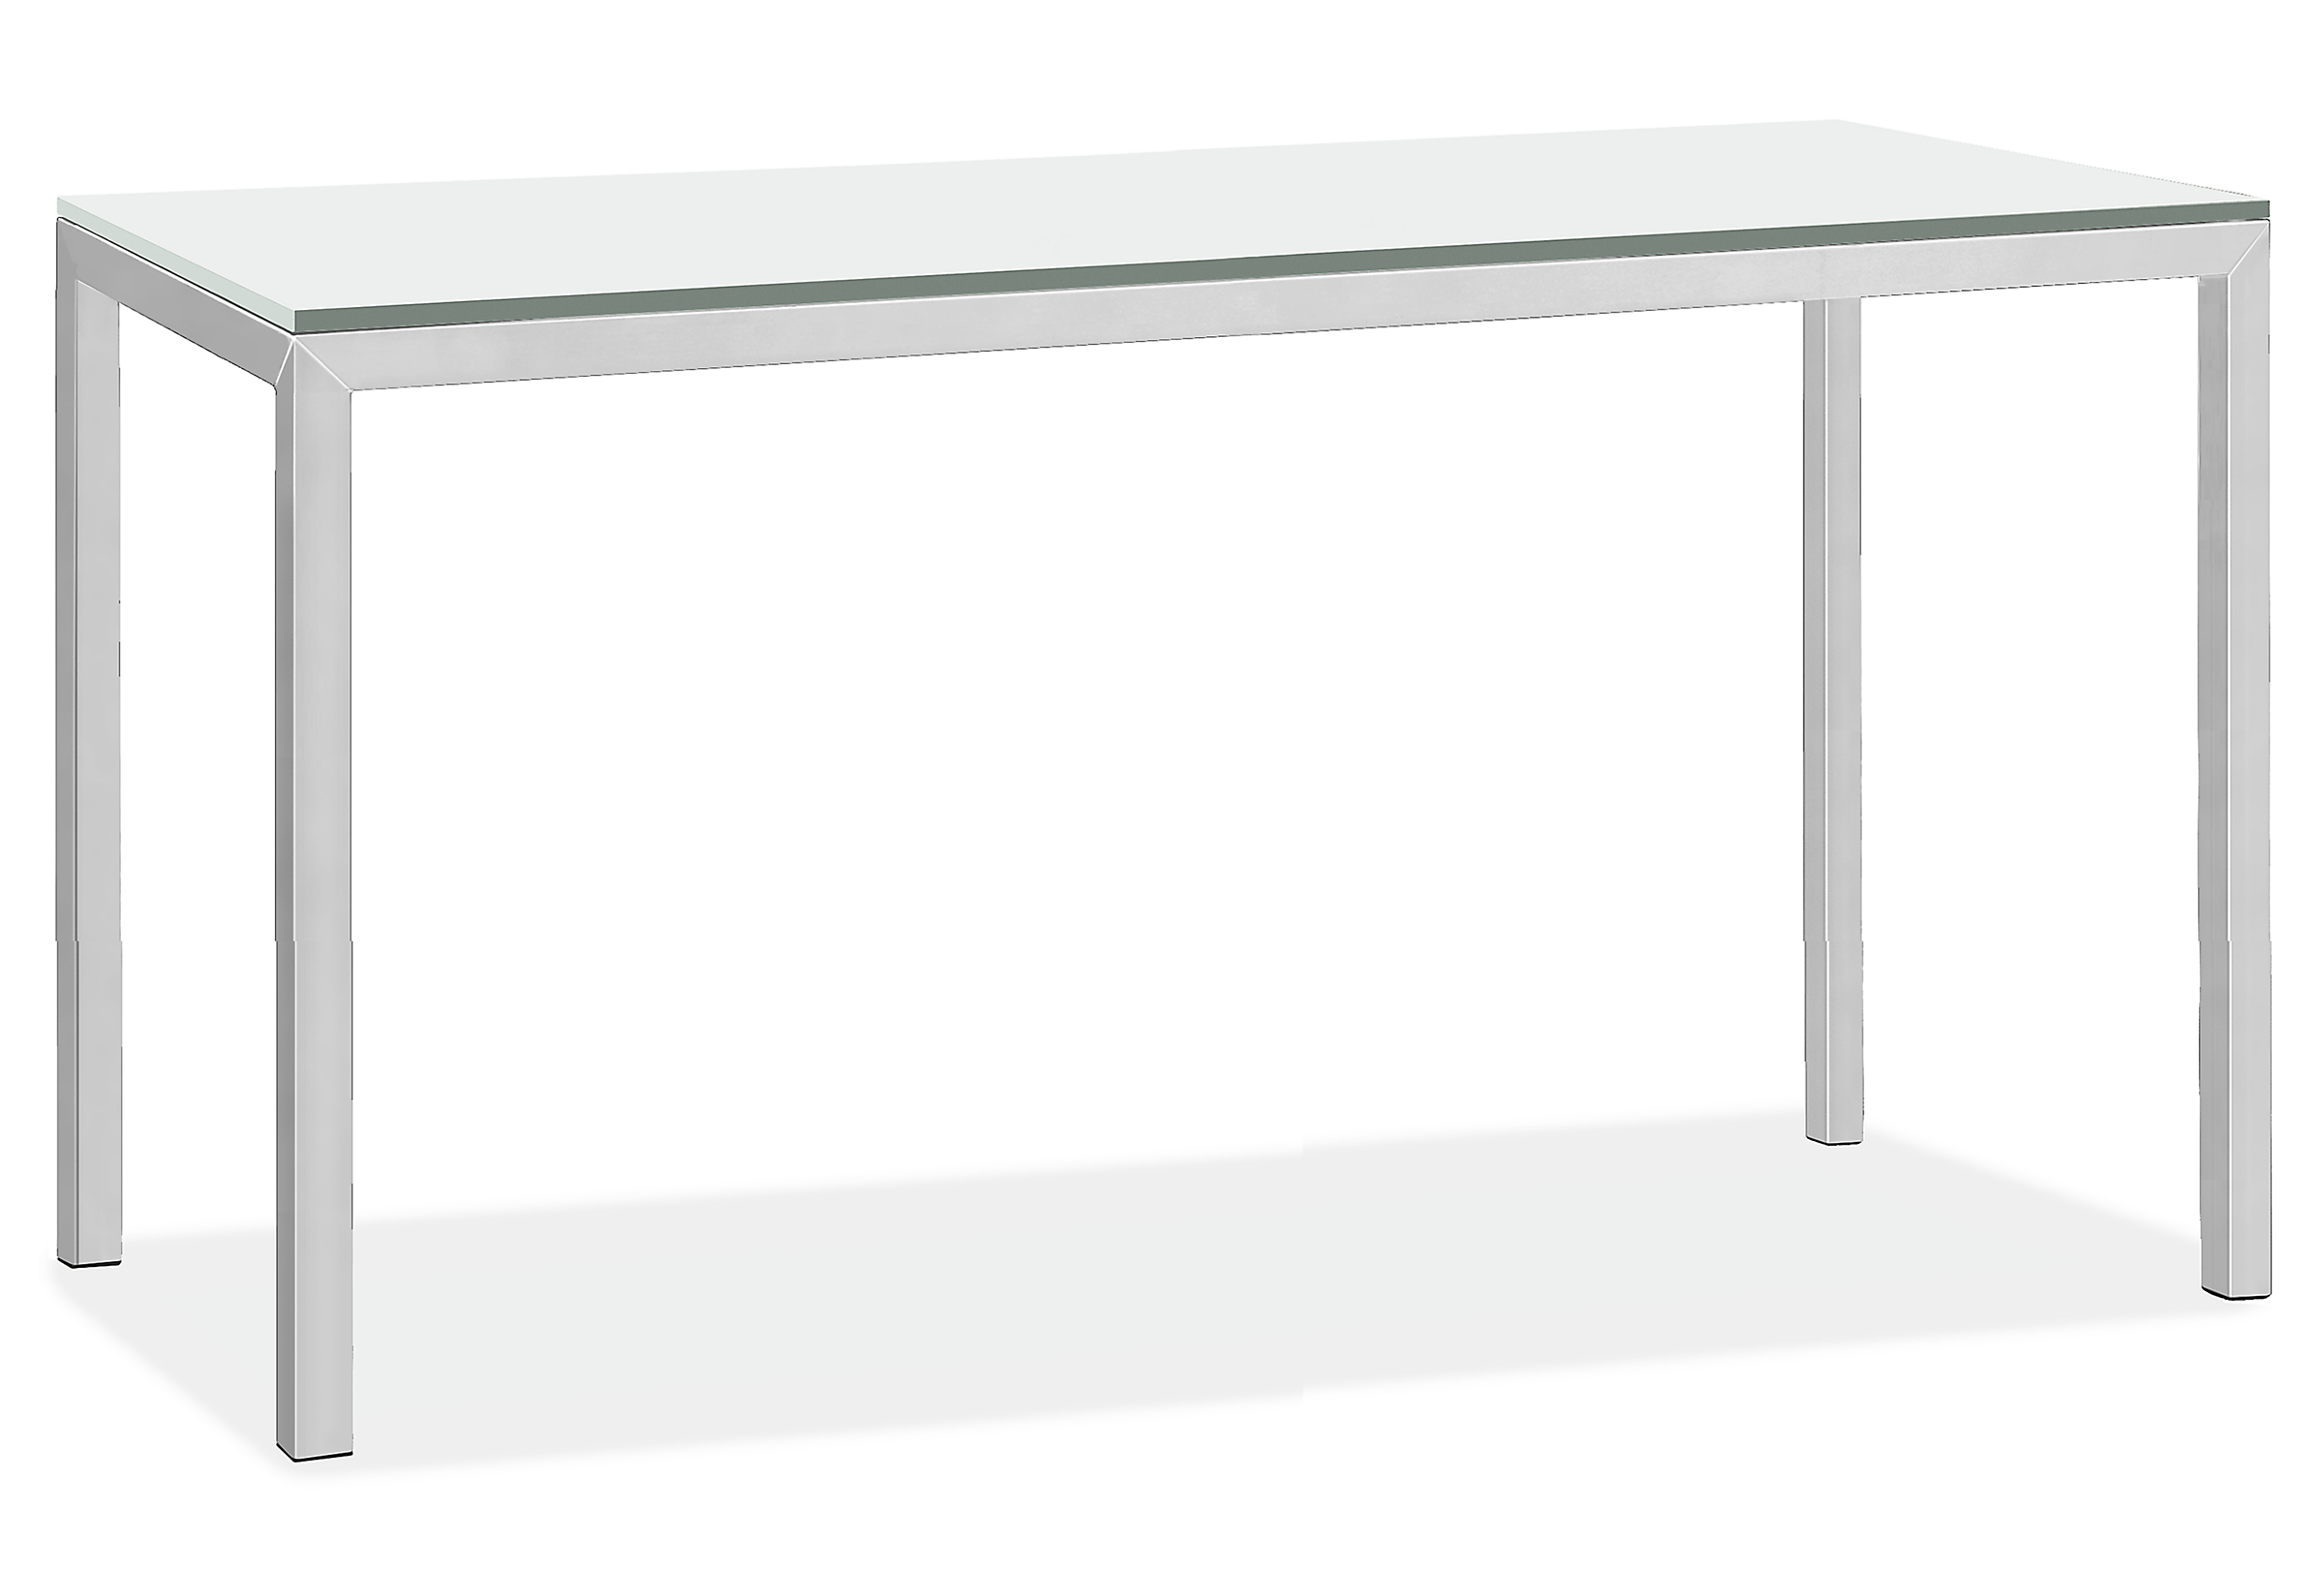 Parsons 70w 24d 36h Counter Table in 1.5" Stainless Steel w/Tempered White Glass